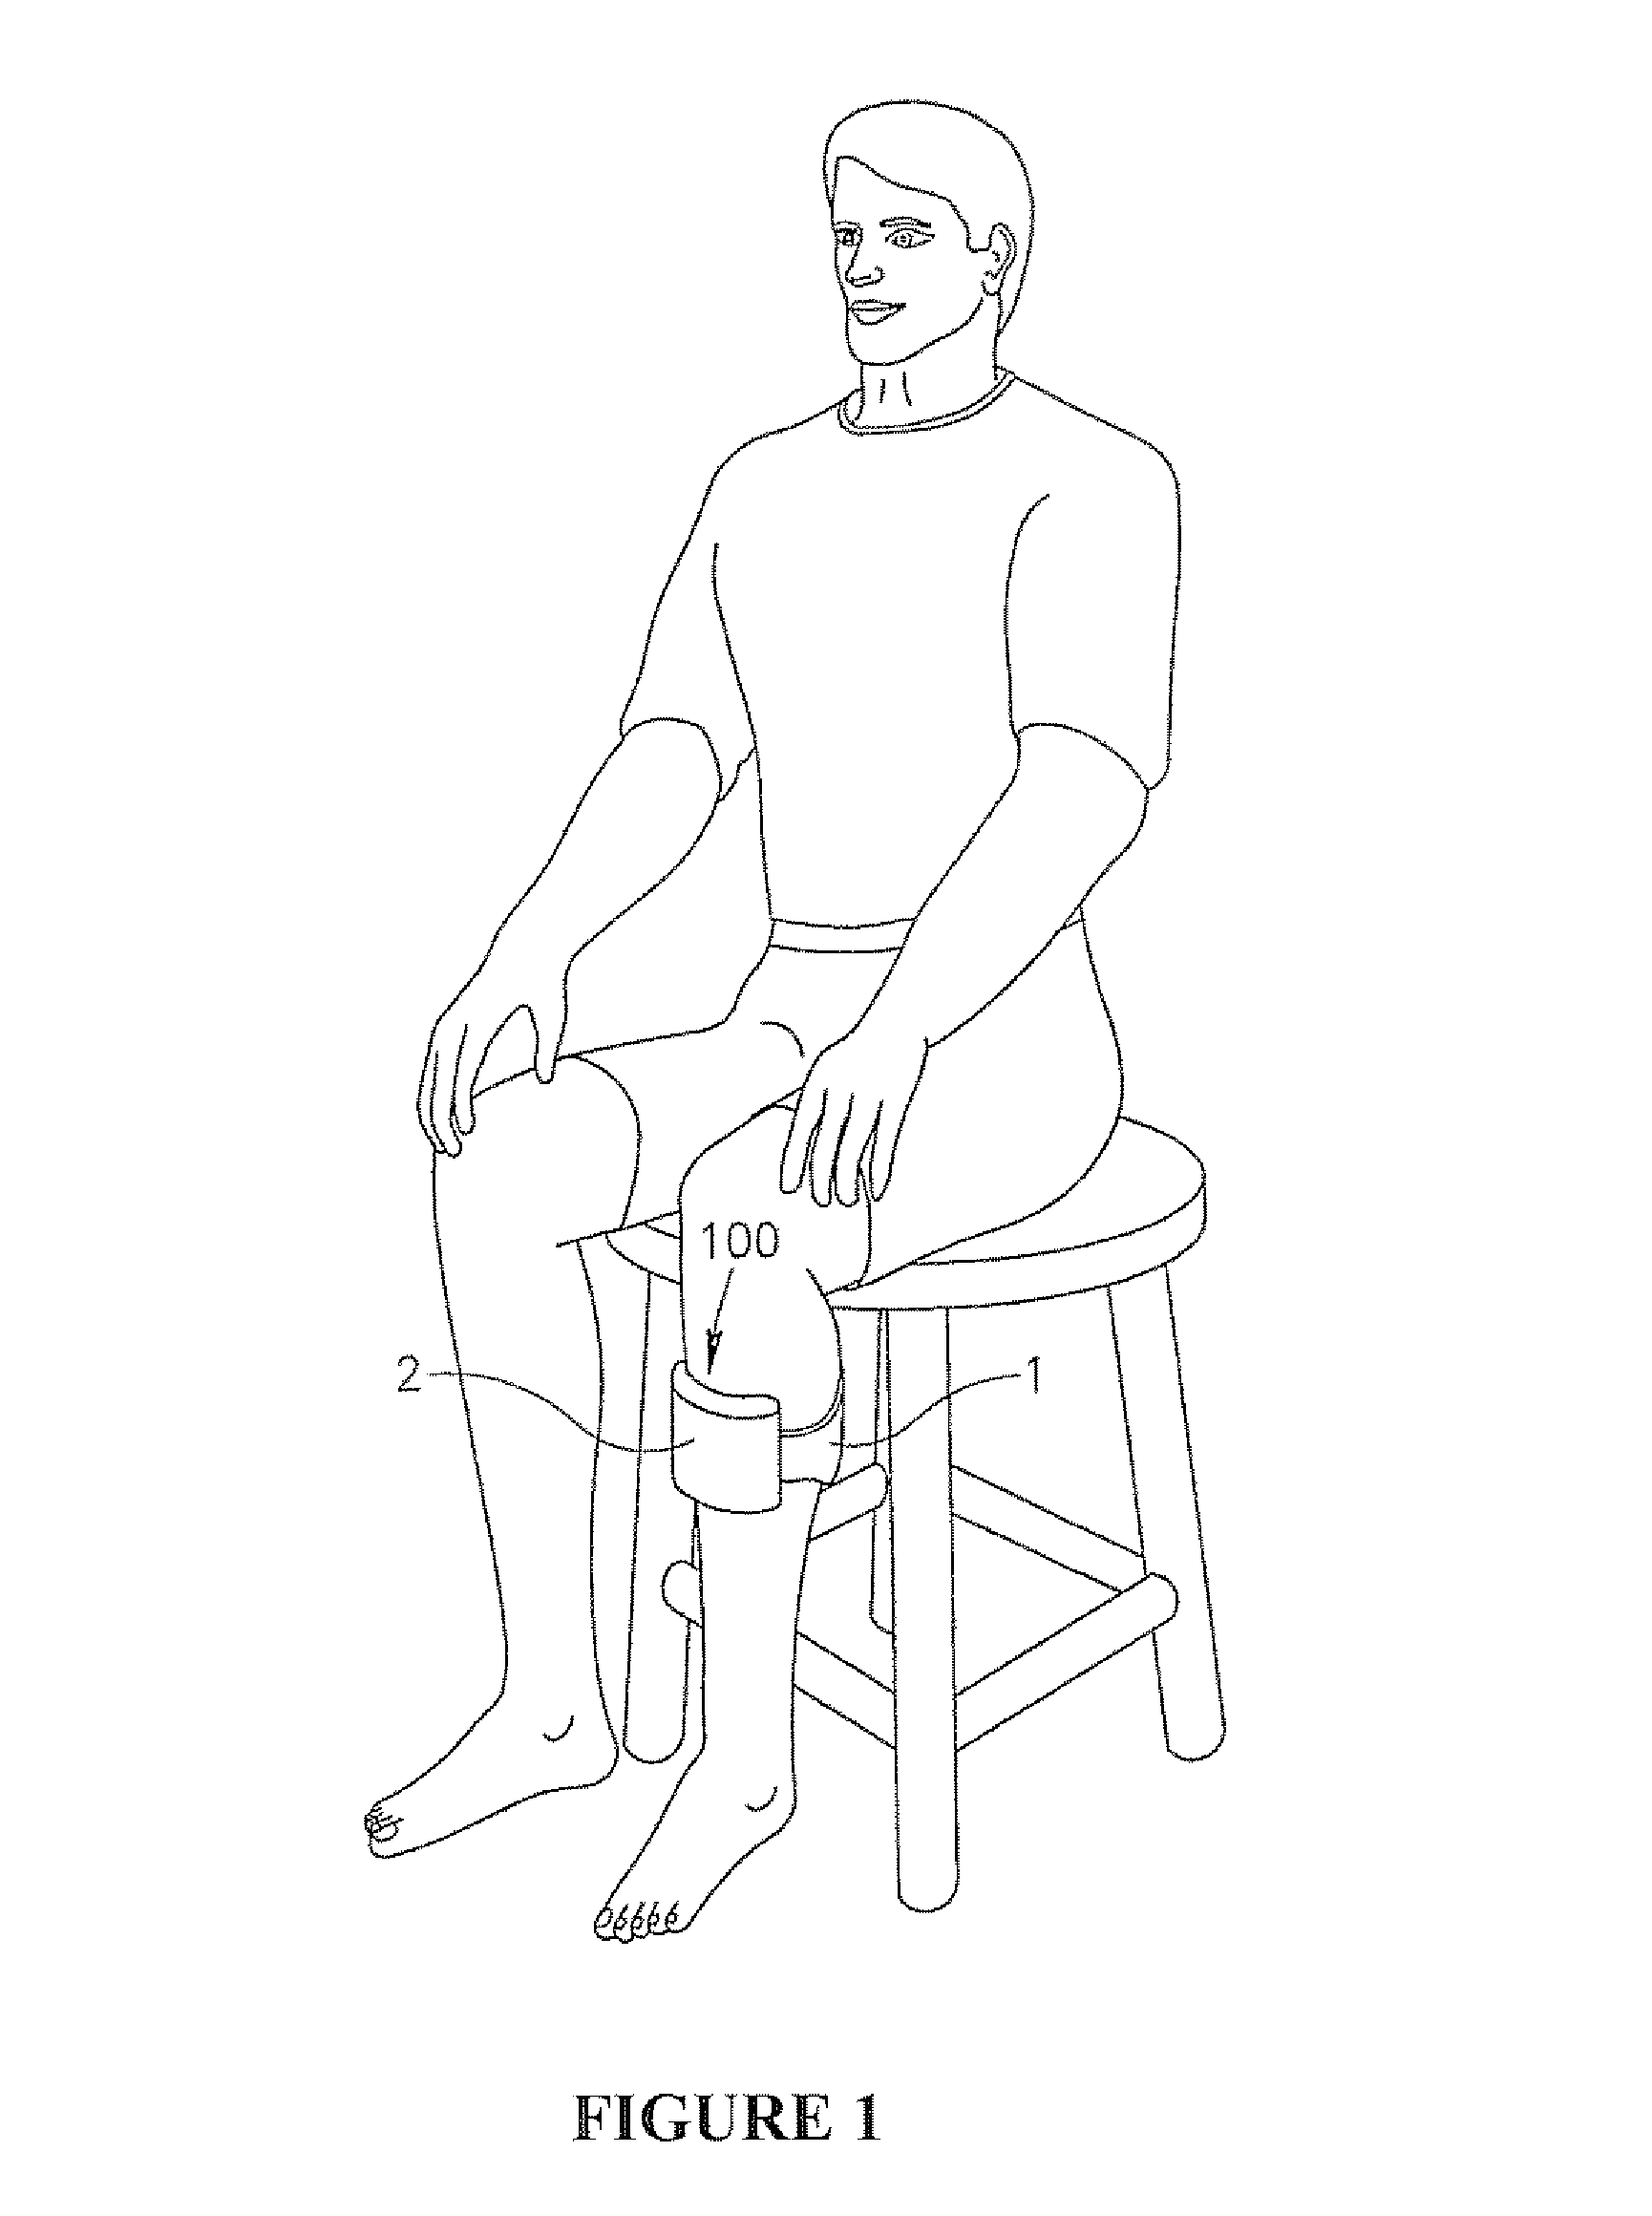 Portable self-contained device for enhancing circulation